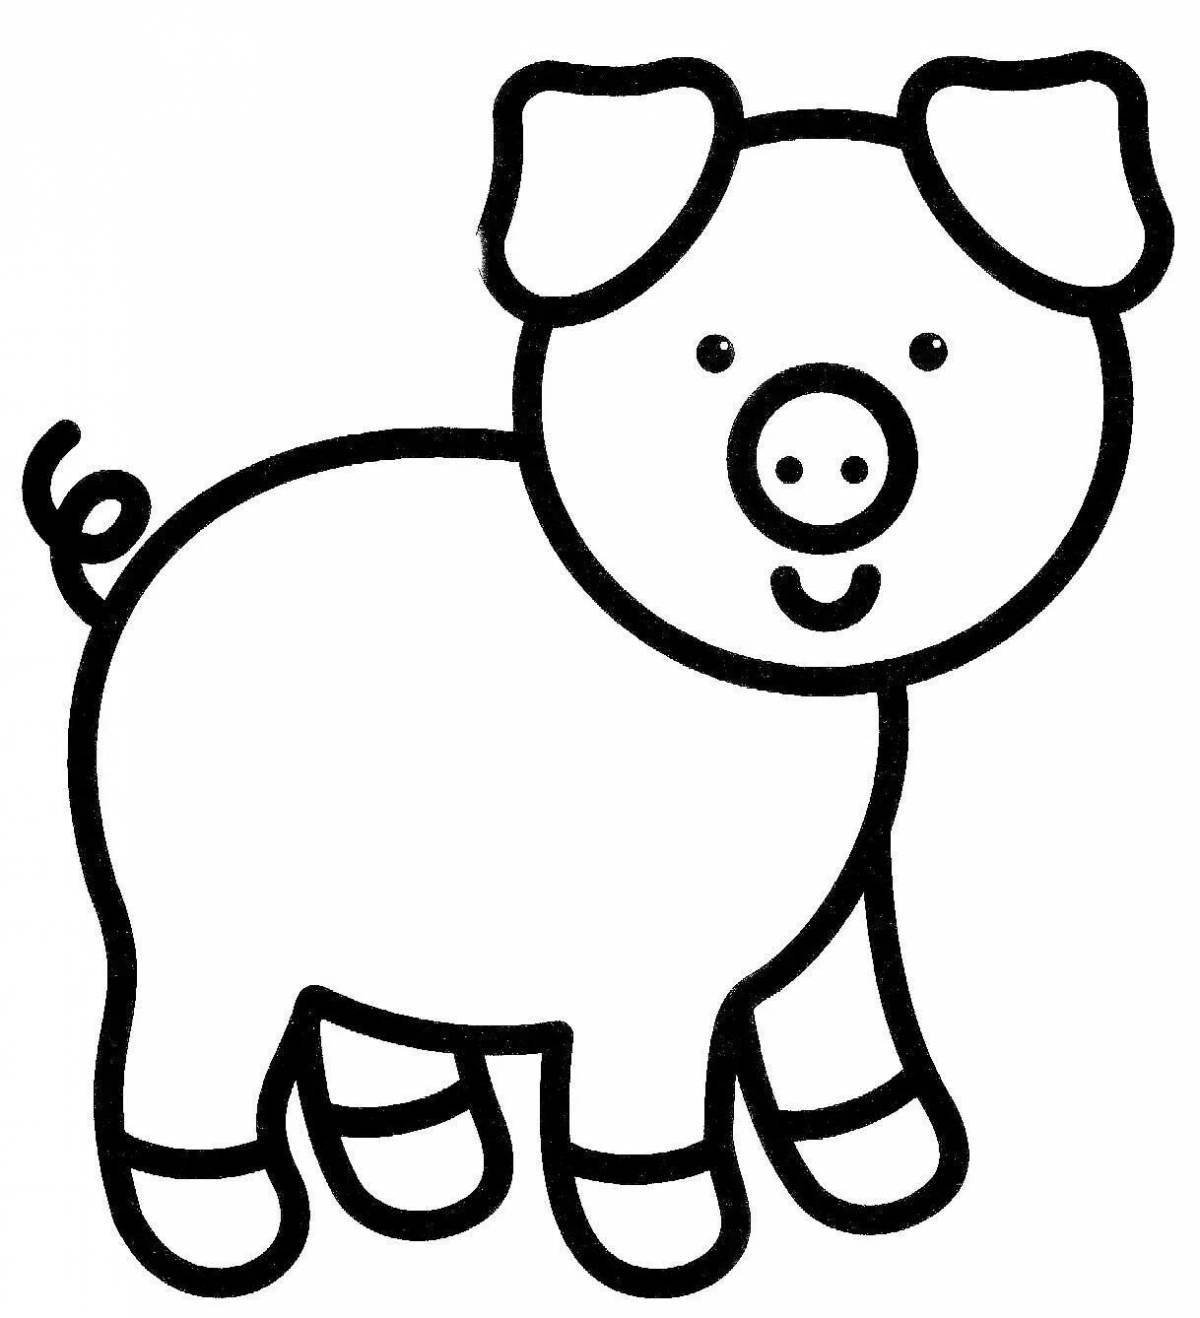 Coloring page template for 2 year olds